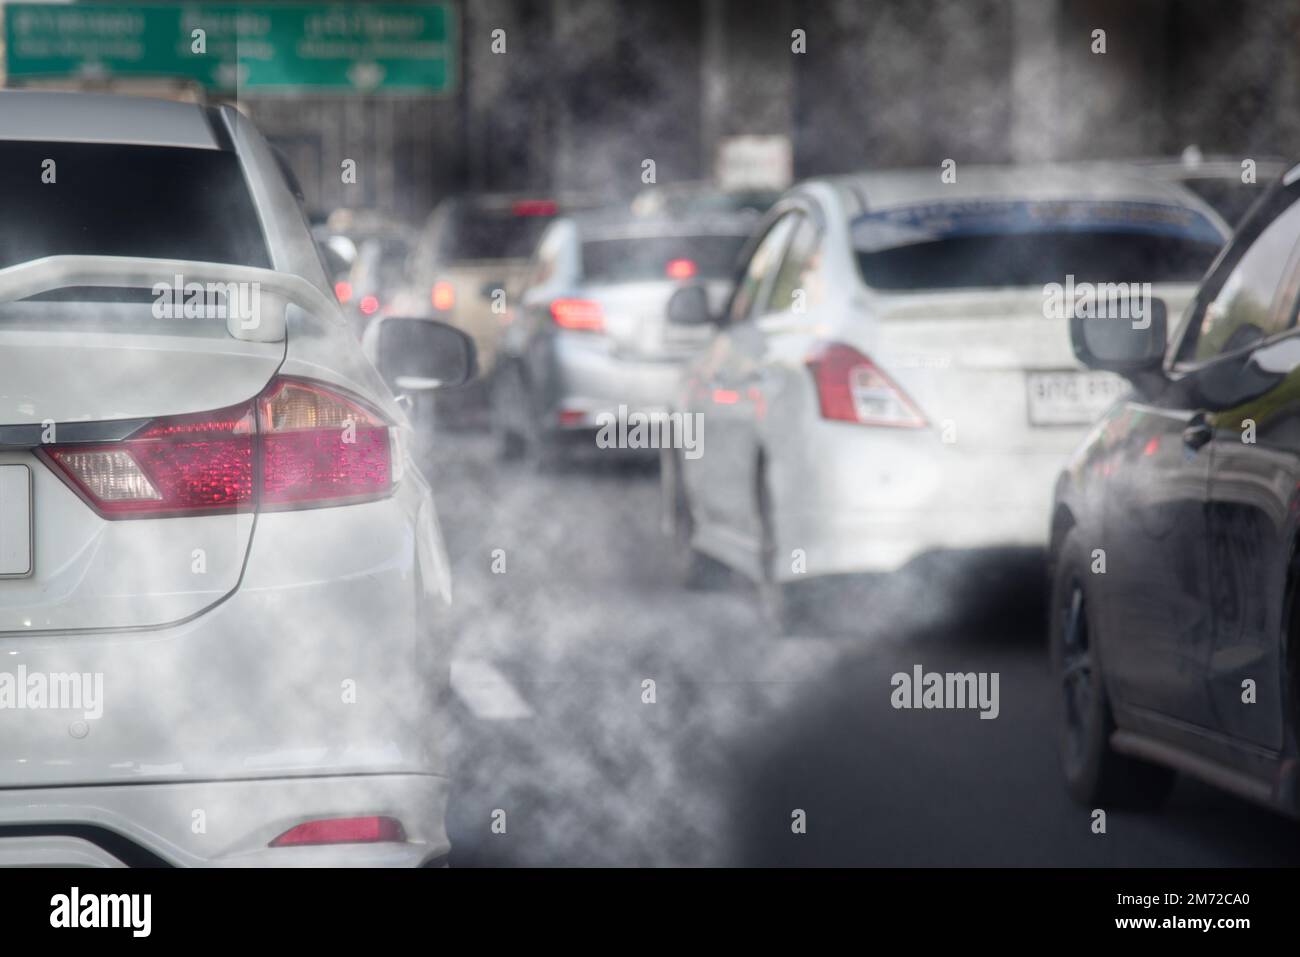 Smoke pollution from car exhaust pipes, traffic jams on the roads at rush hour. Stock Photo